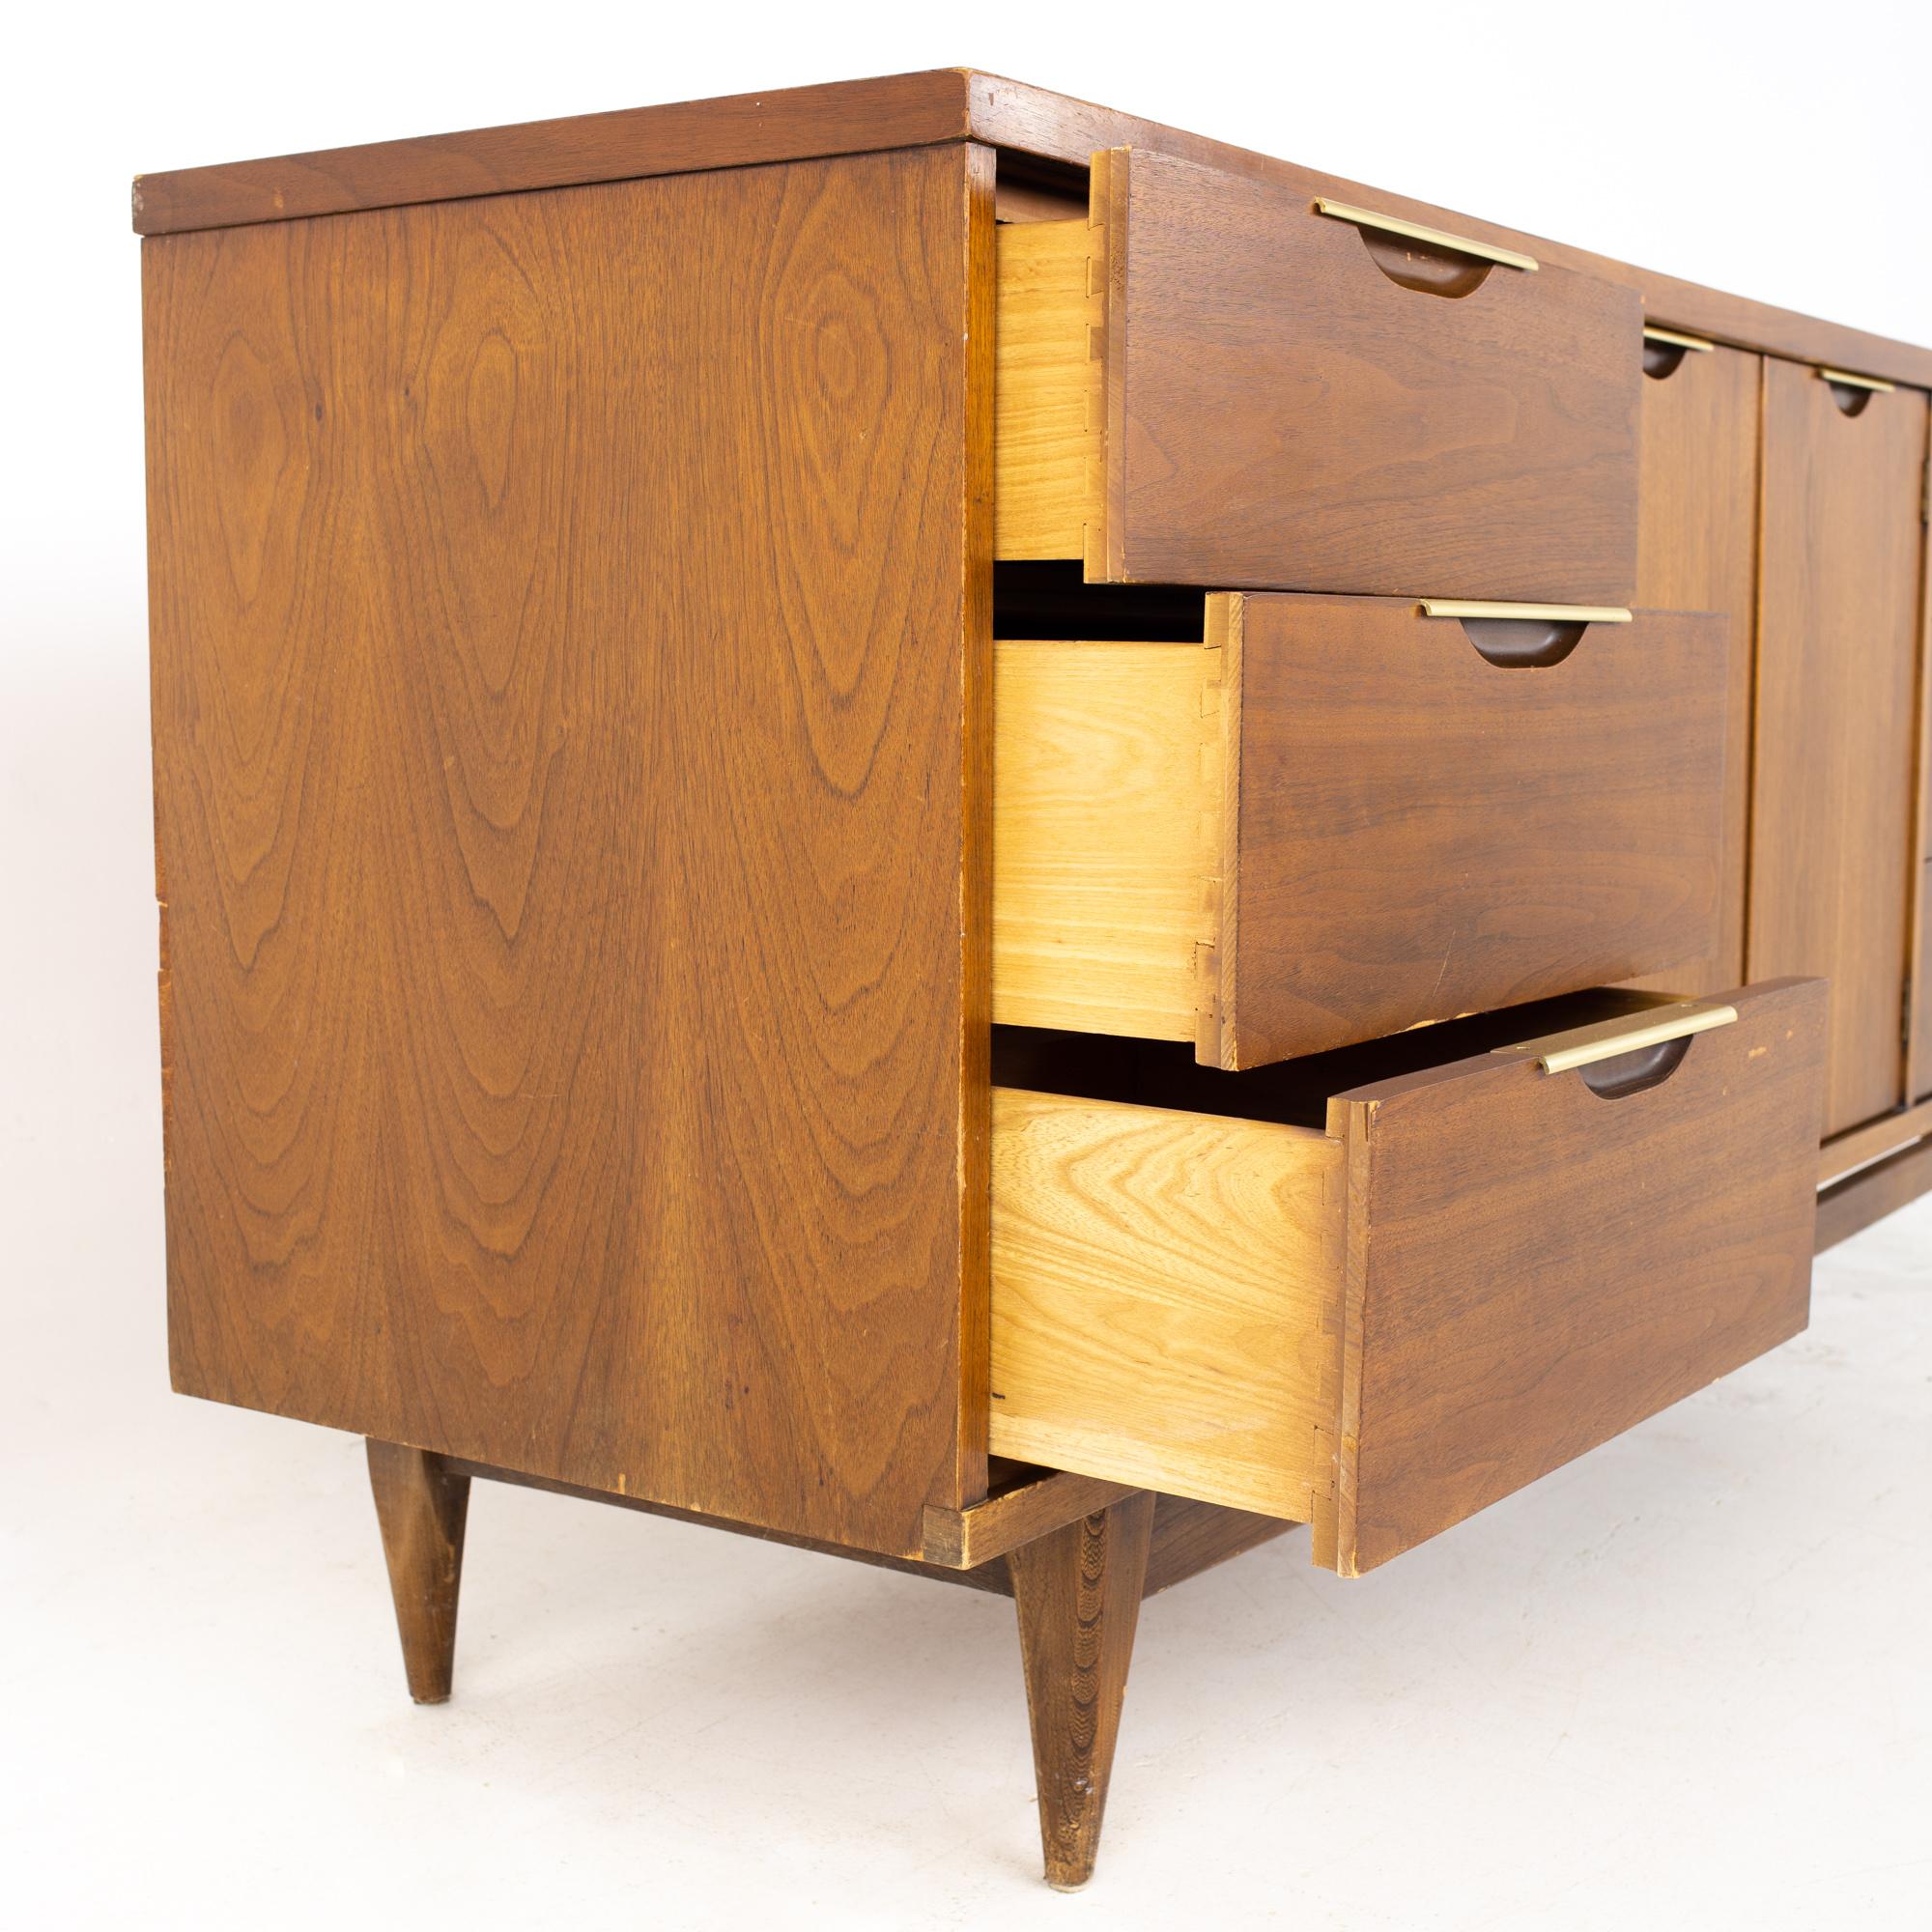 Late 20th Century Kent Coffey Tableau MCM Walnut and Stainless 9 Drawer Lowboy Dresser Credenza